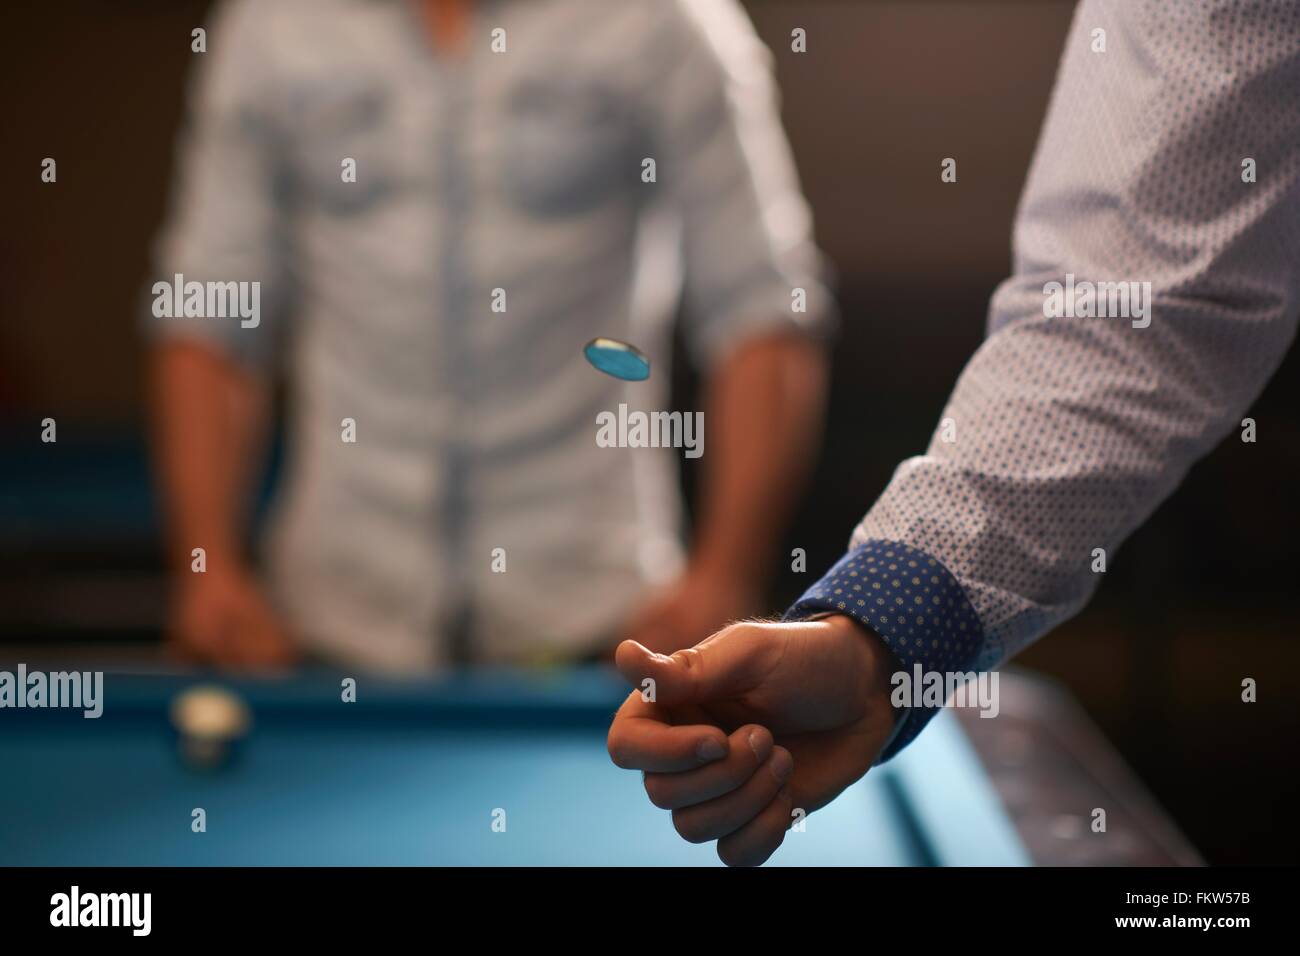 Man tossing coin at pool table Stock Photo